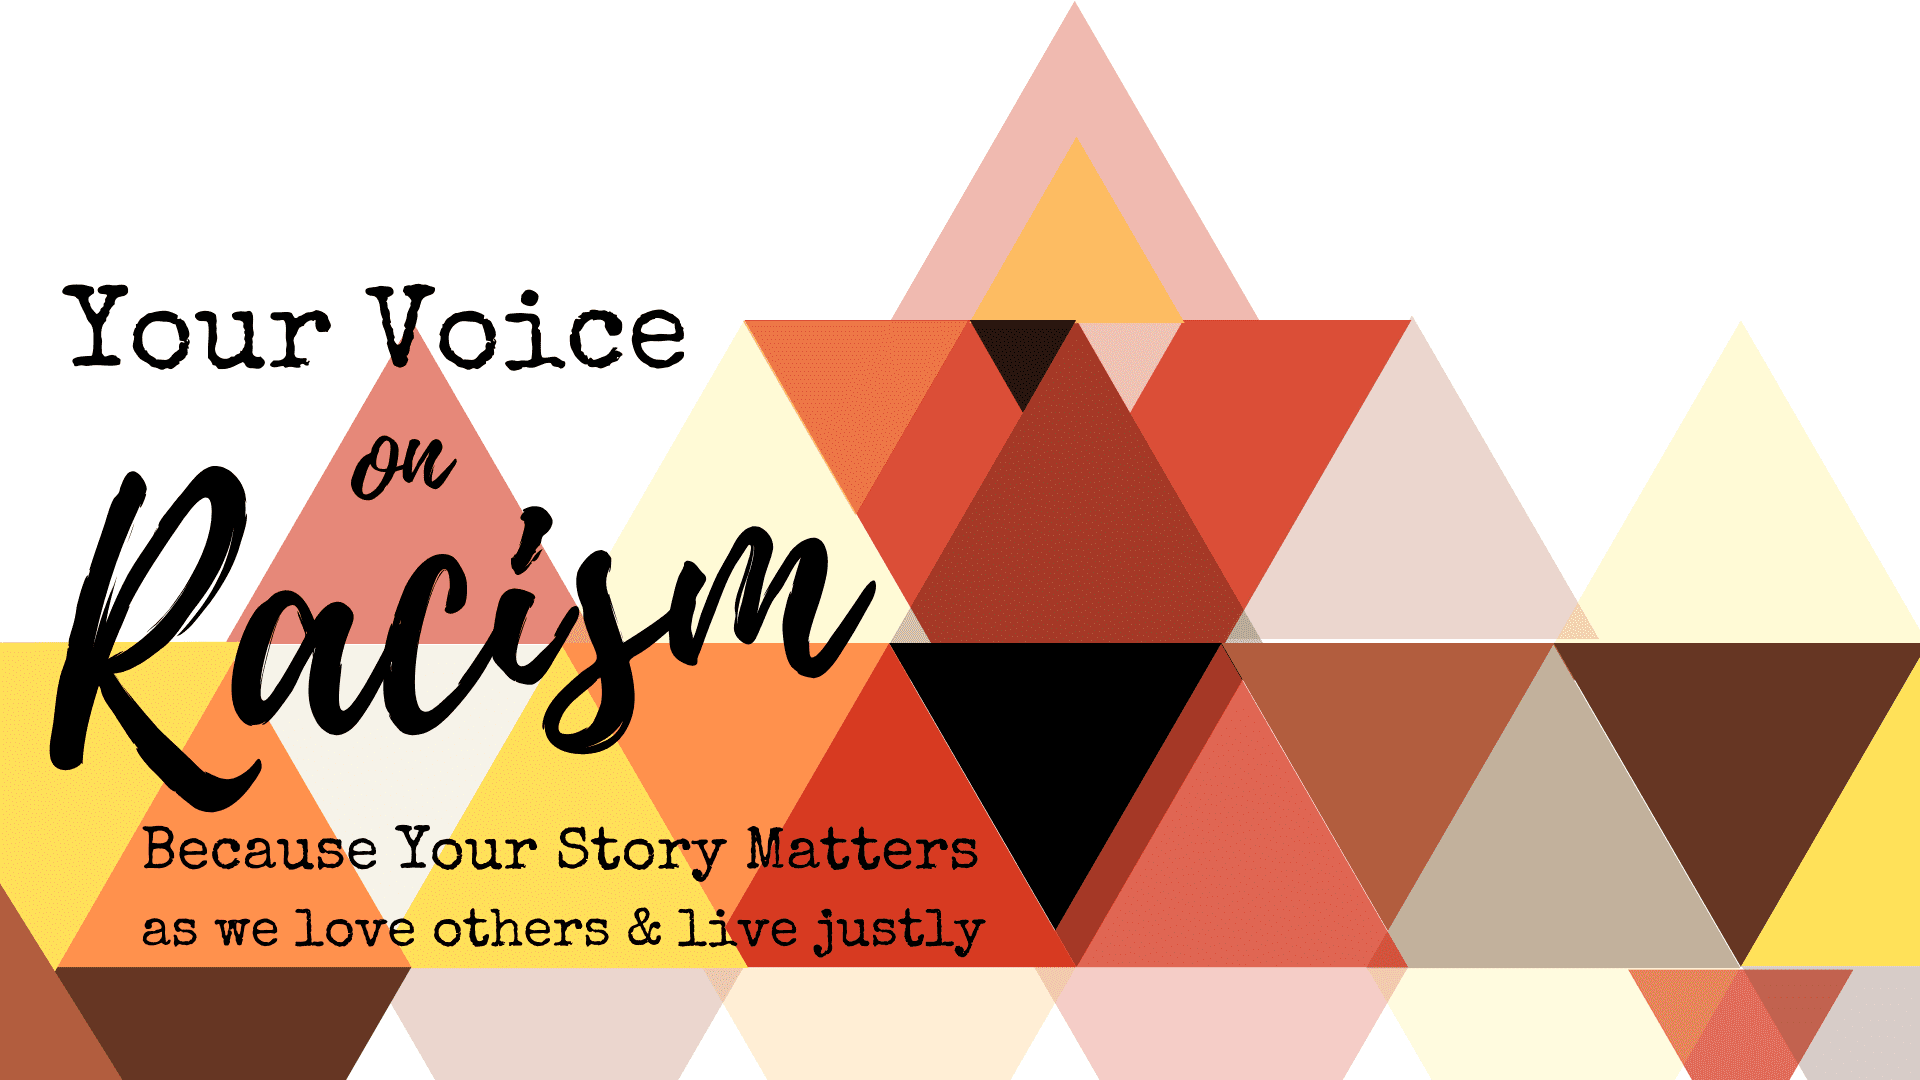 Your Voice On Racism